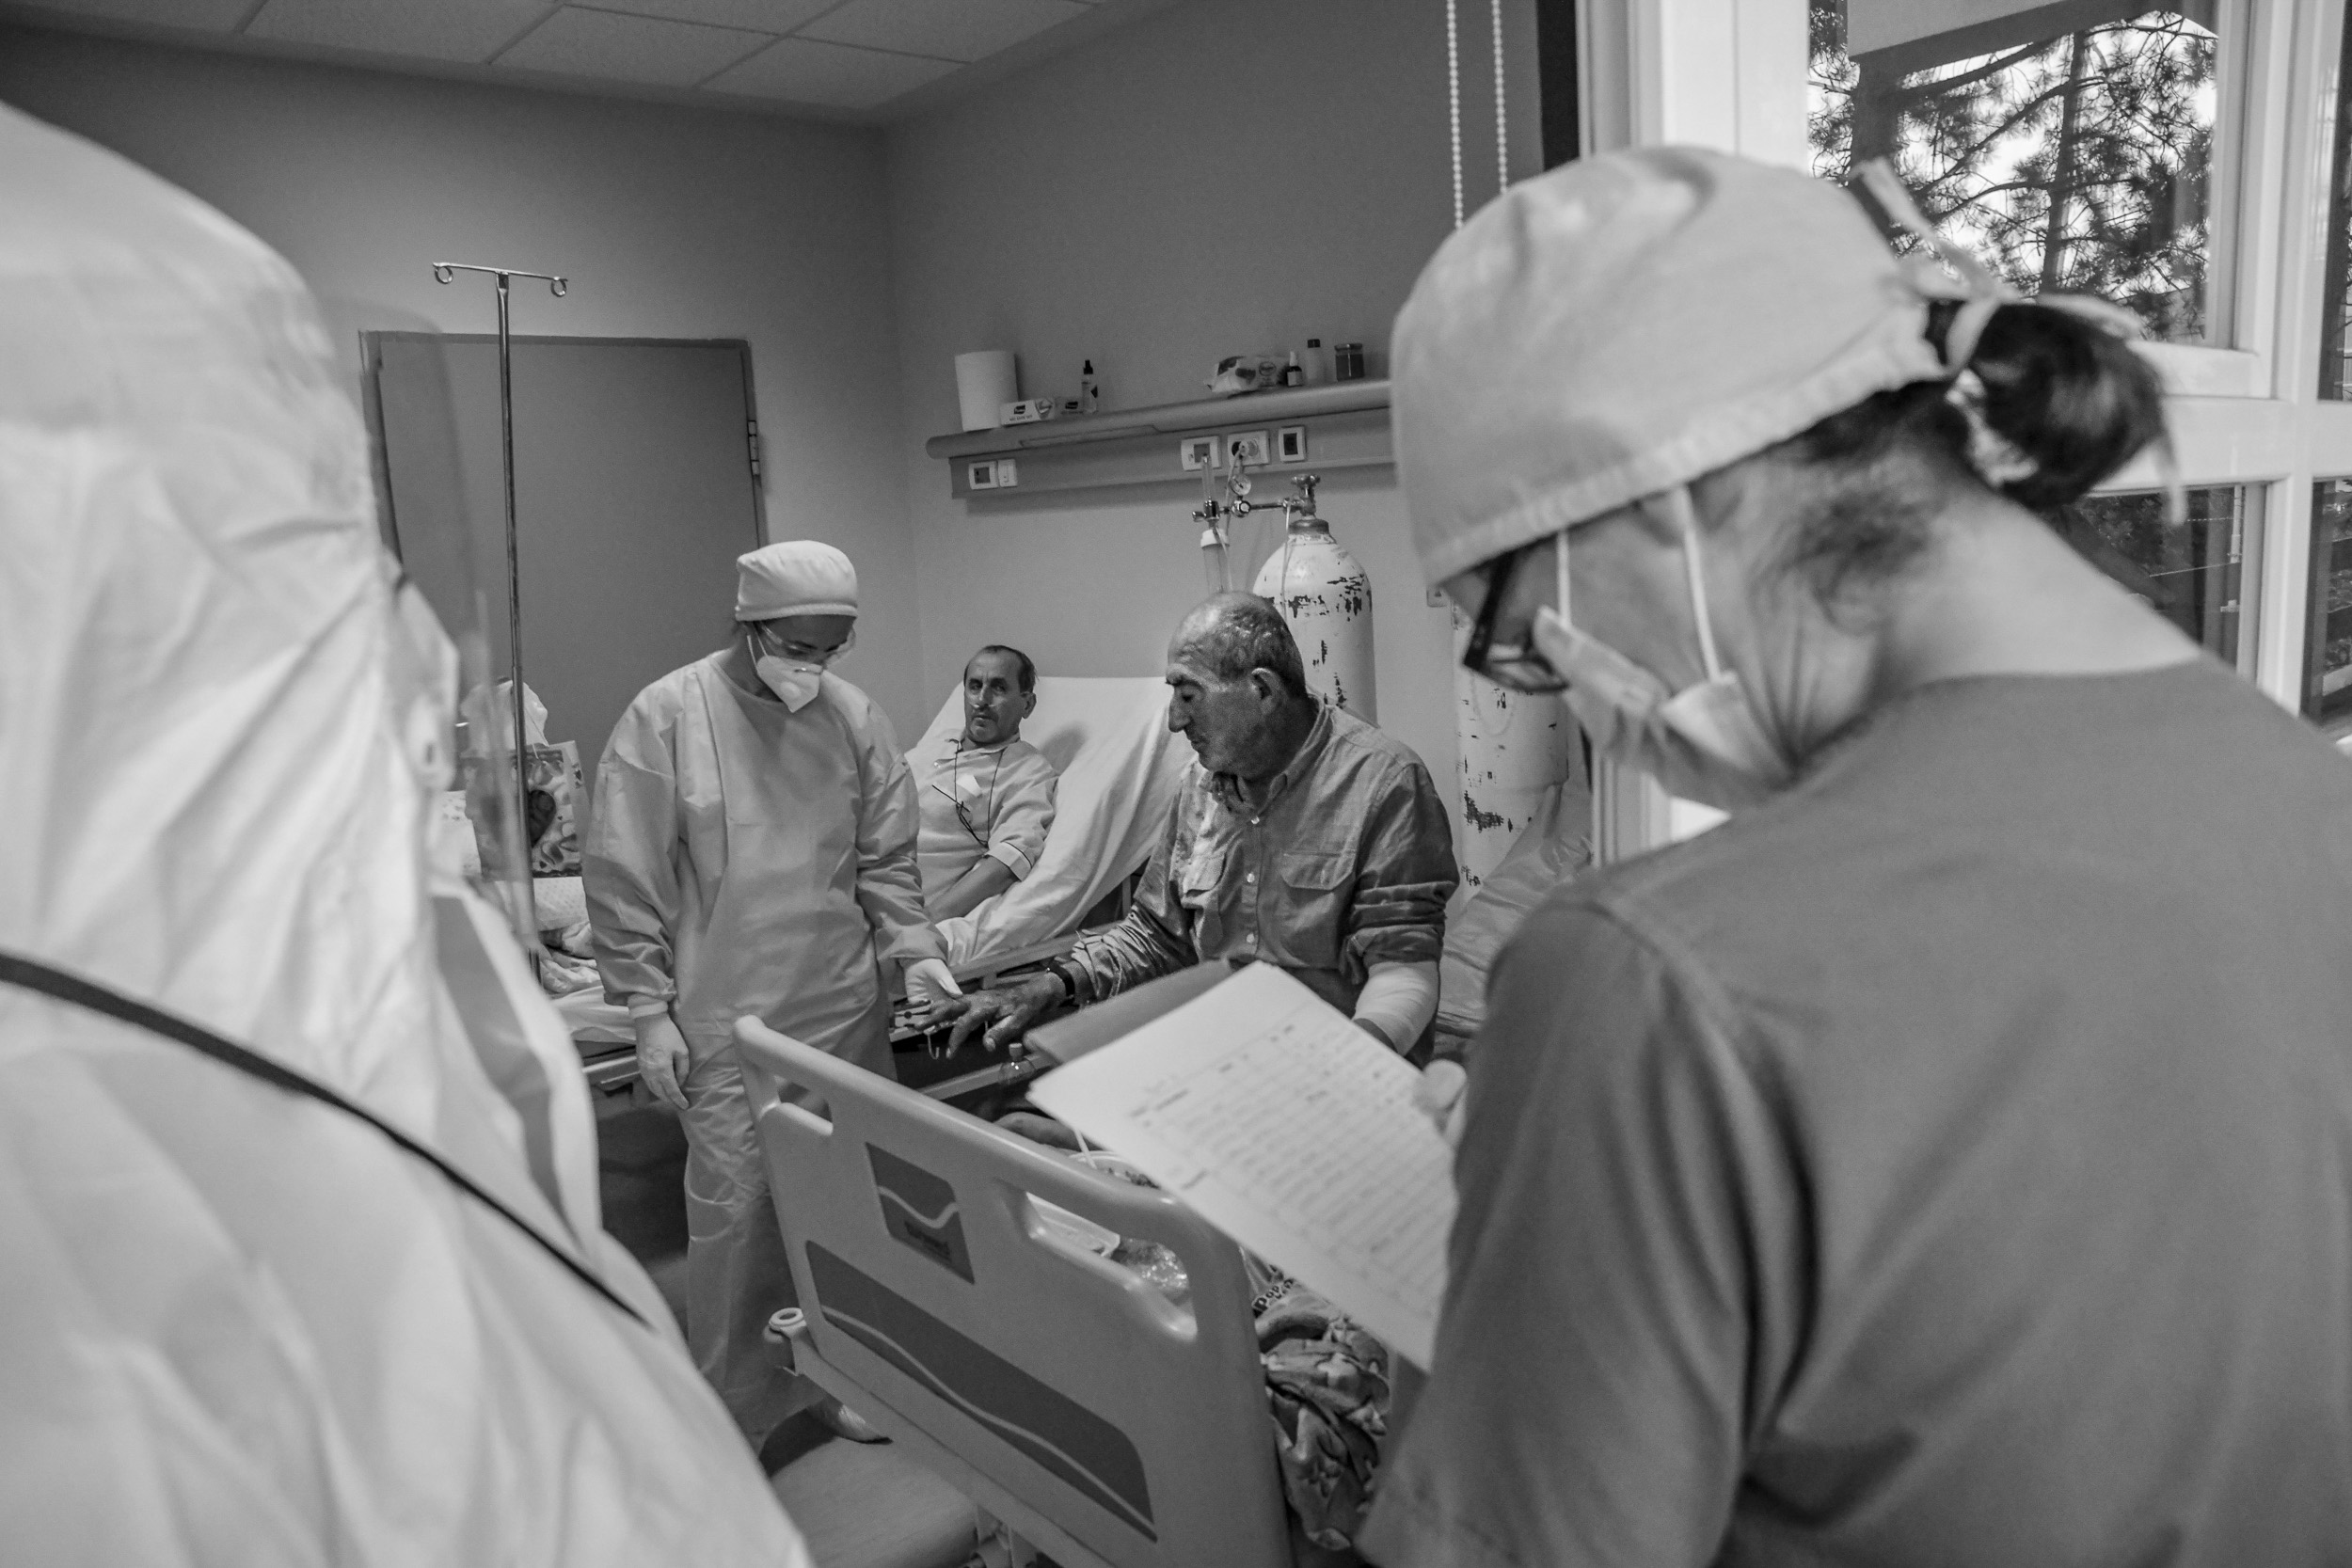 Medical staff conduct regular rounds of the wards to check on patients’ vitals.